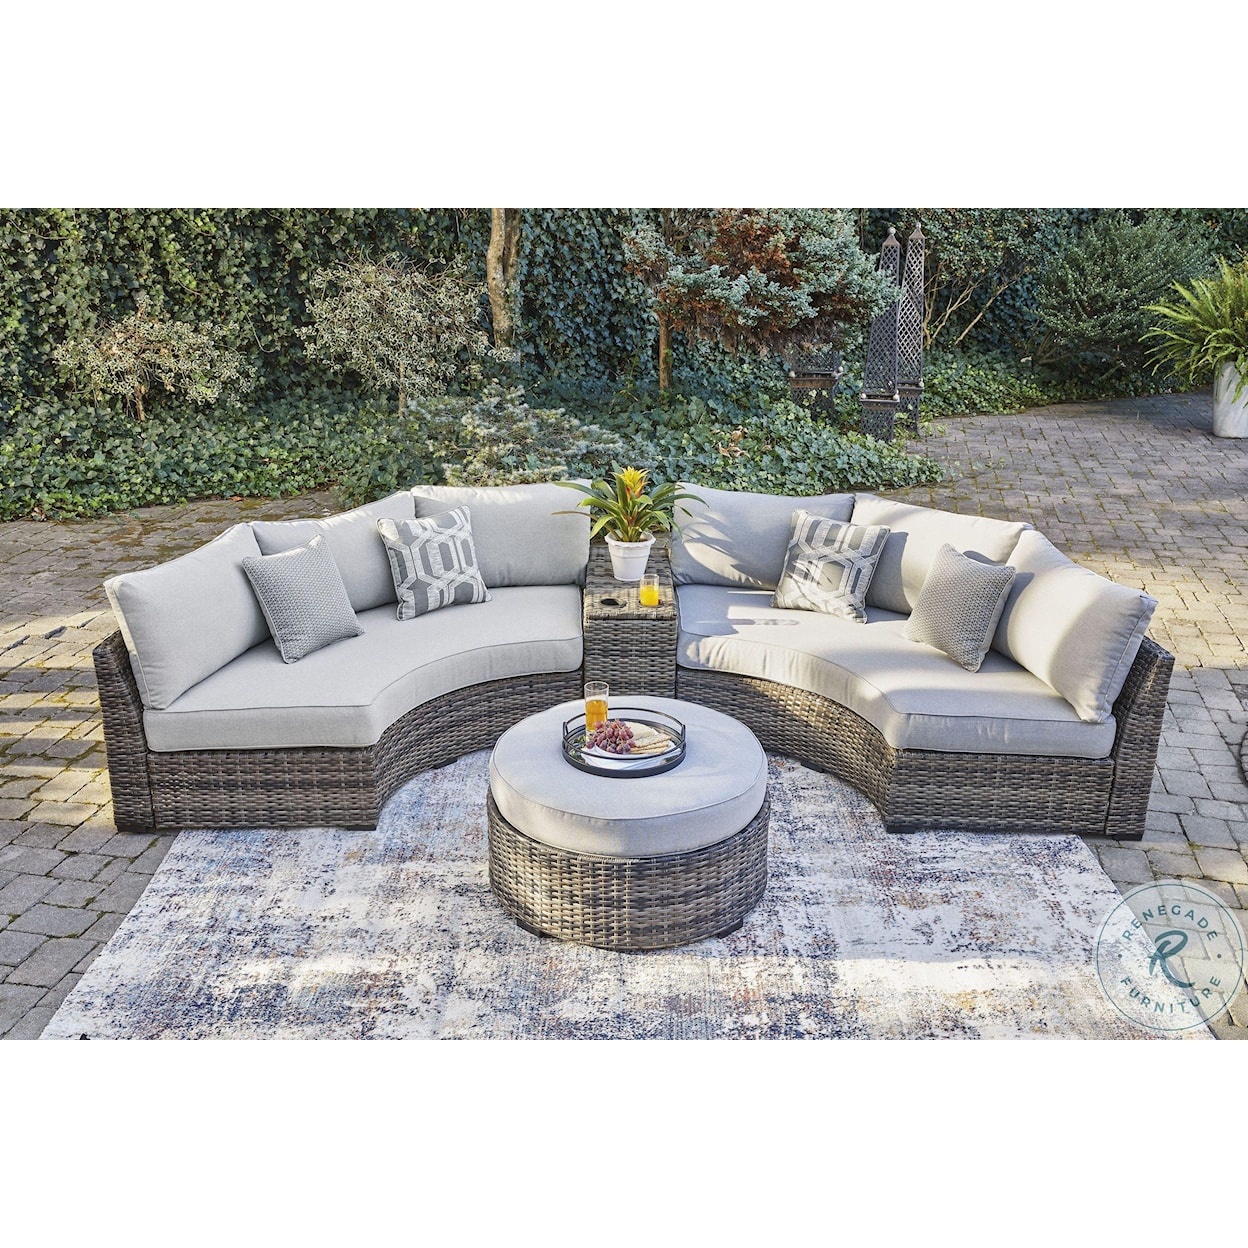 Signature Design by Ashley Harbor Court 4 PC Outdoor Sectional and Ottoman